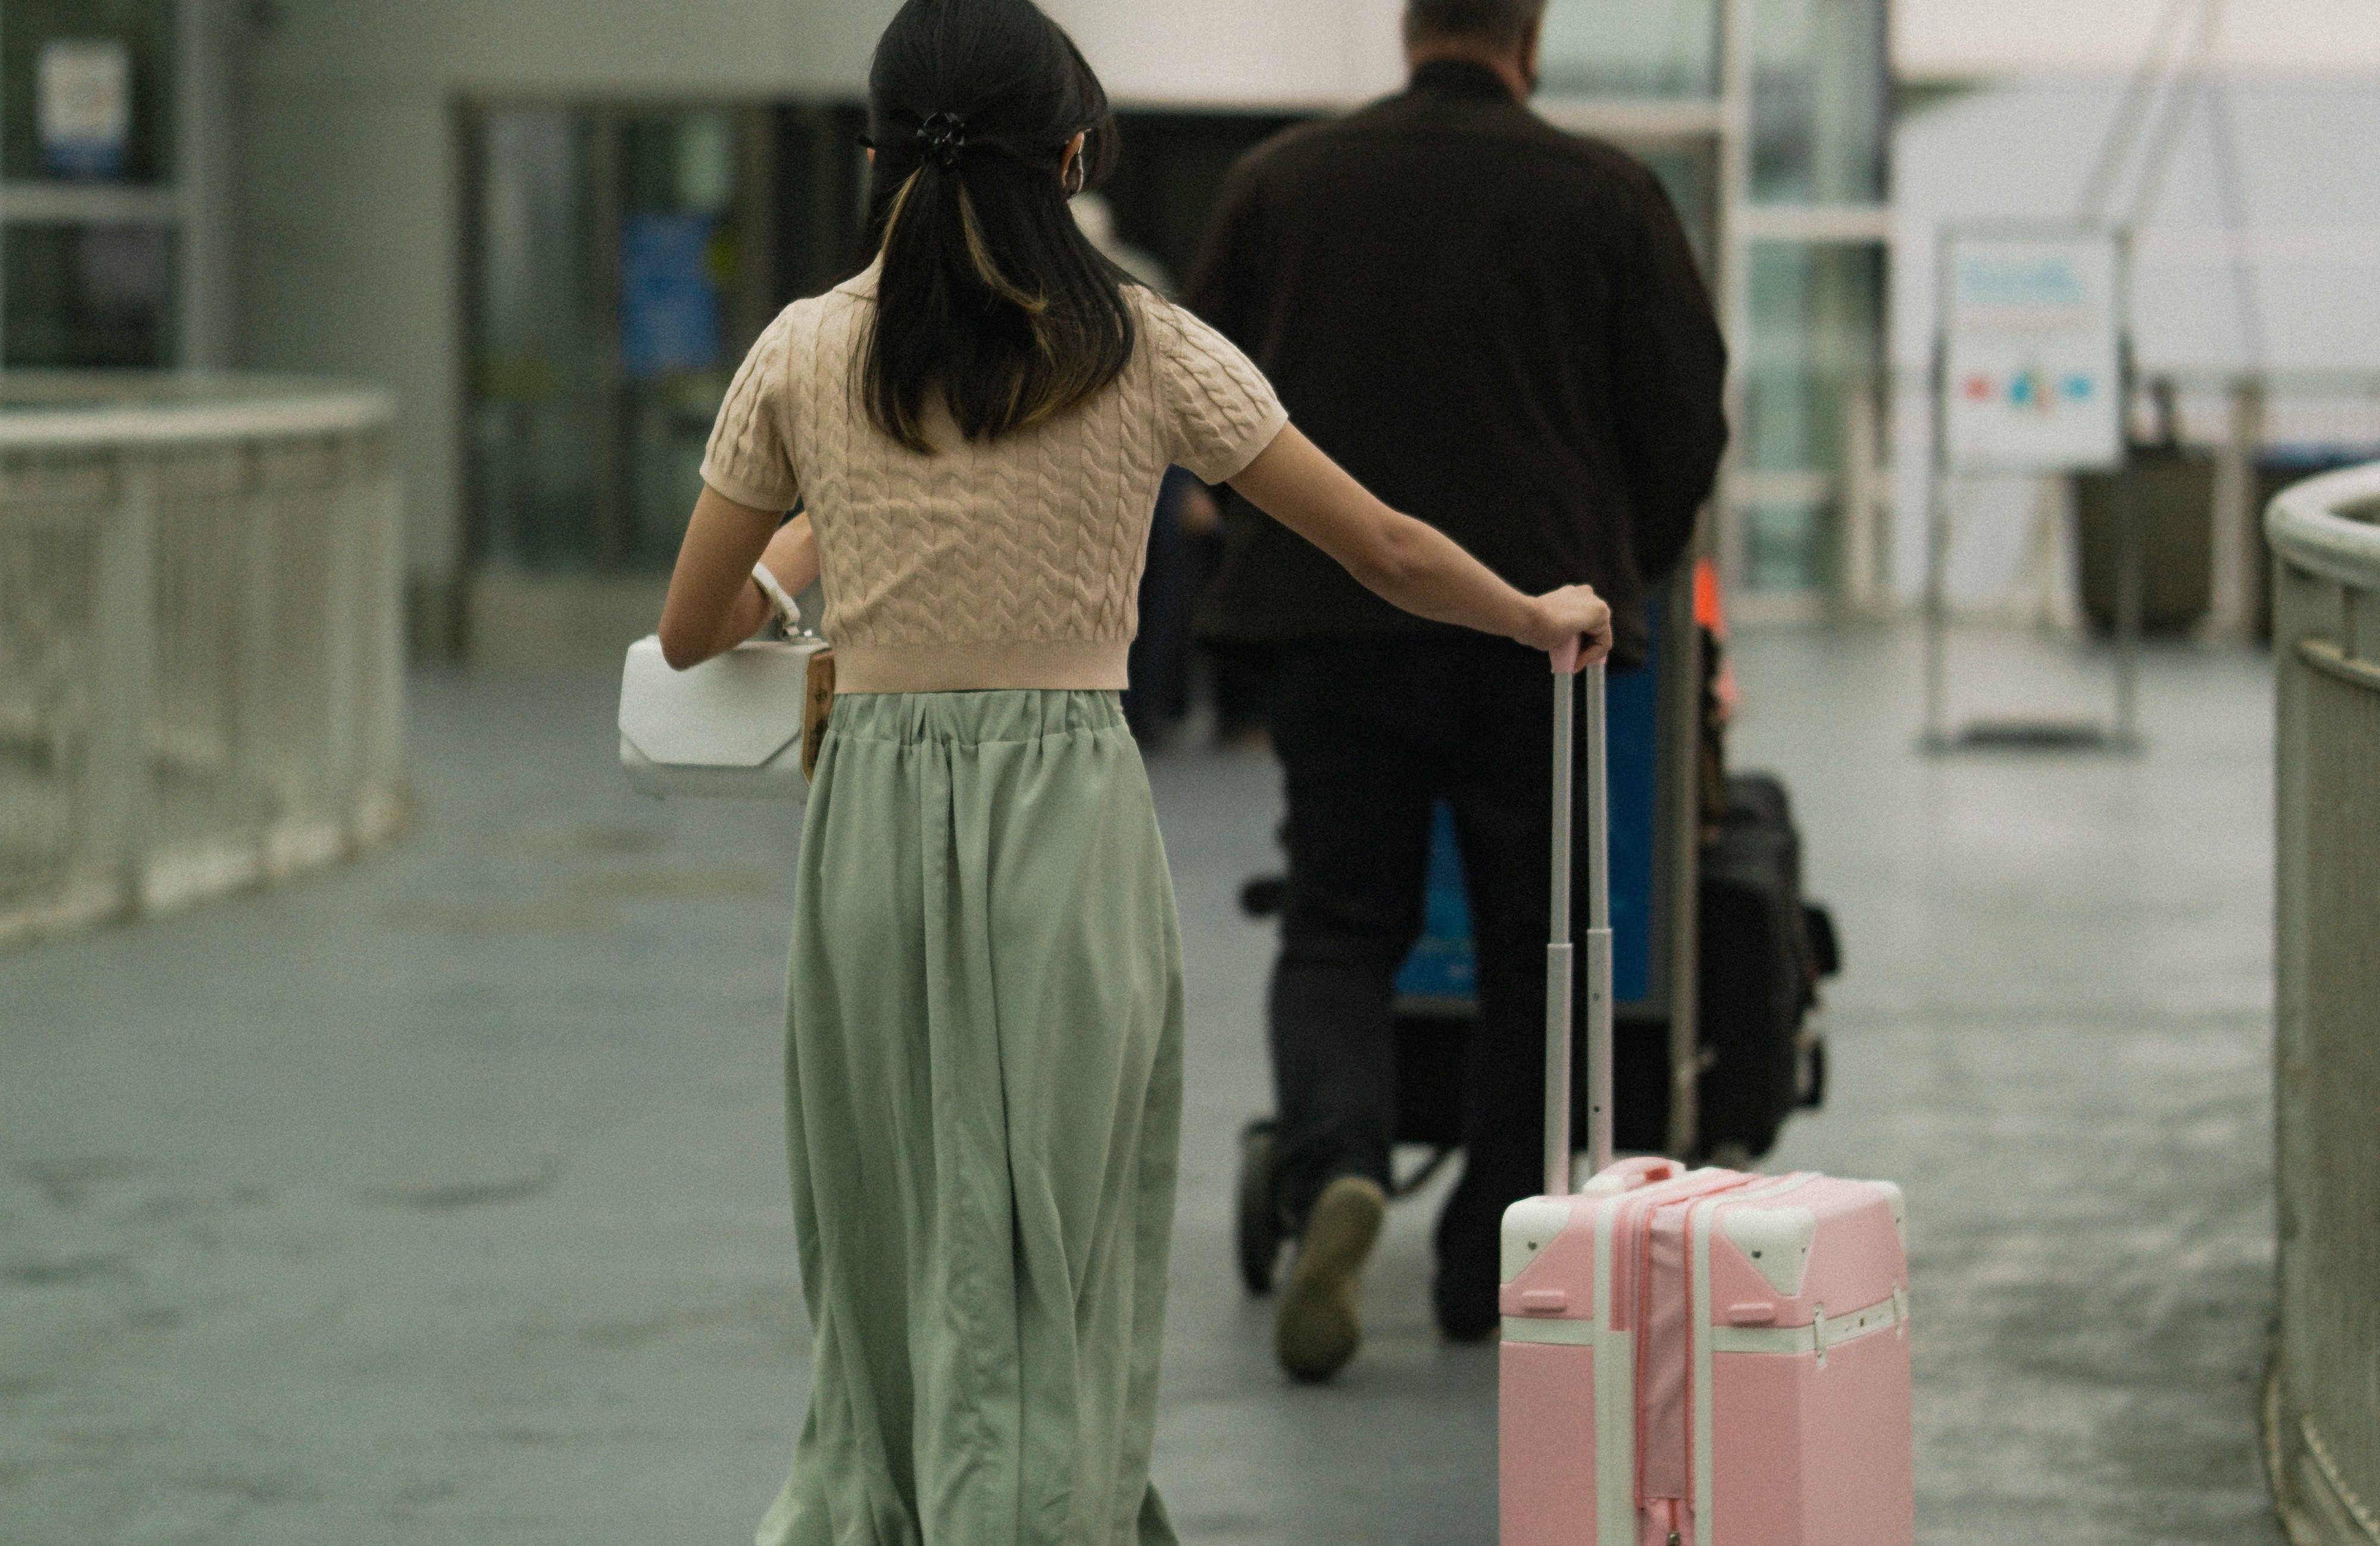 Woman with dark hair in brown T shirt pushing her pink luggage through the airport and man in black long sleeves pushing trolley